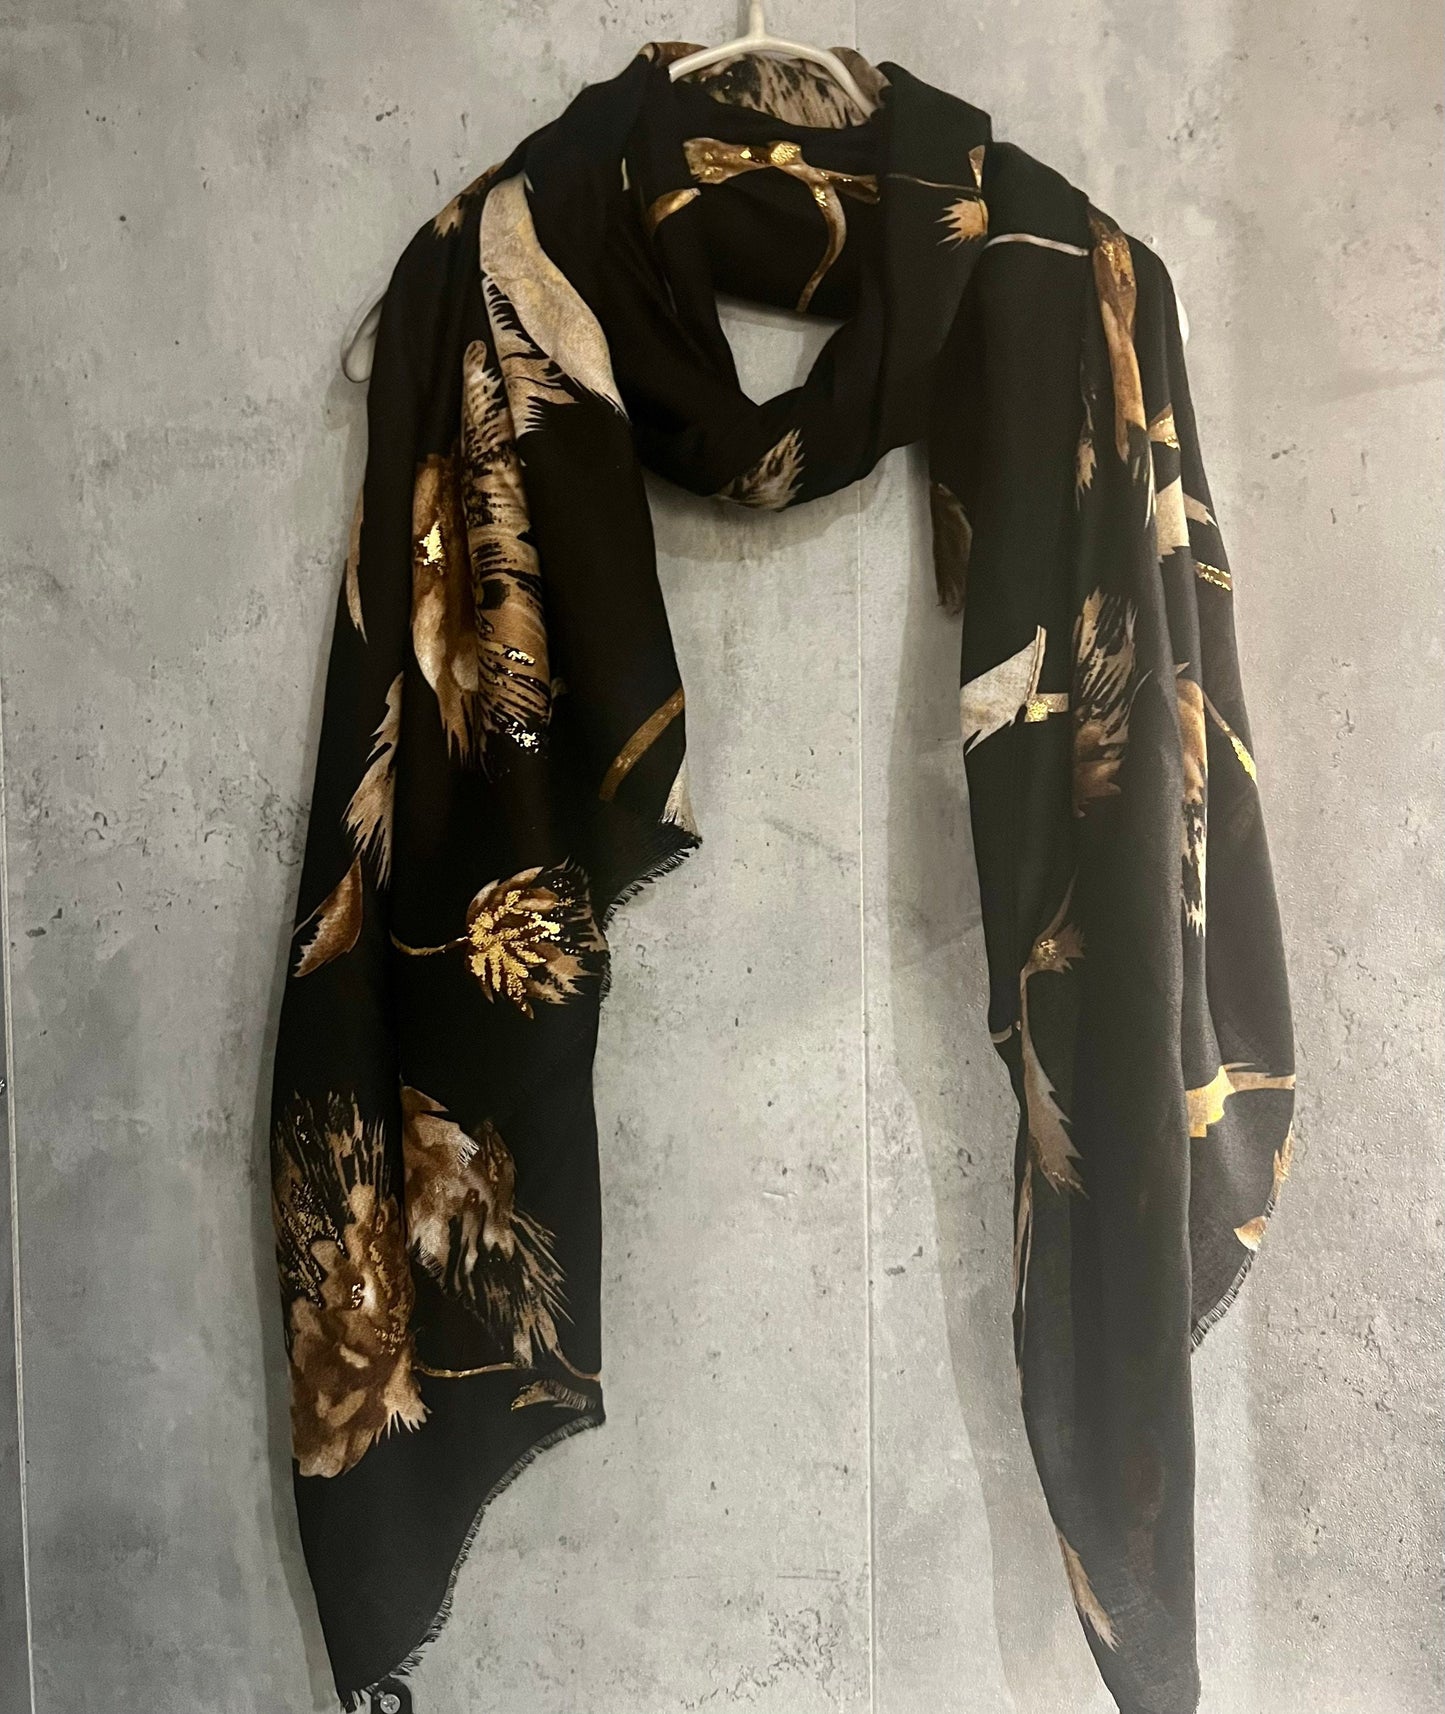 Thistle Flowers Gold Dusk Black Cotton Scarf/Spring Summer Autumn Scarf/Scarf Women/Gift For Her Birthday Christmas/Gifts For Mum/UK Seller